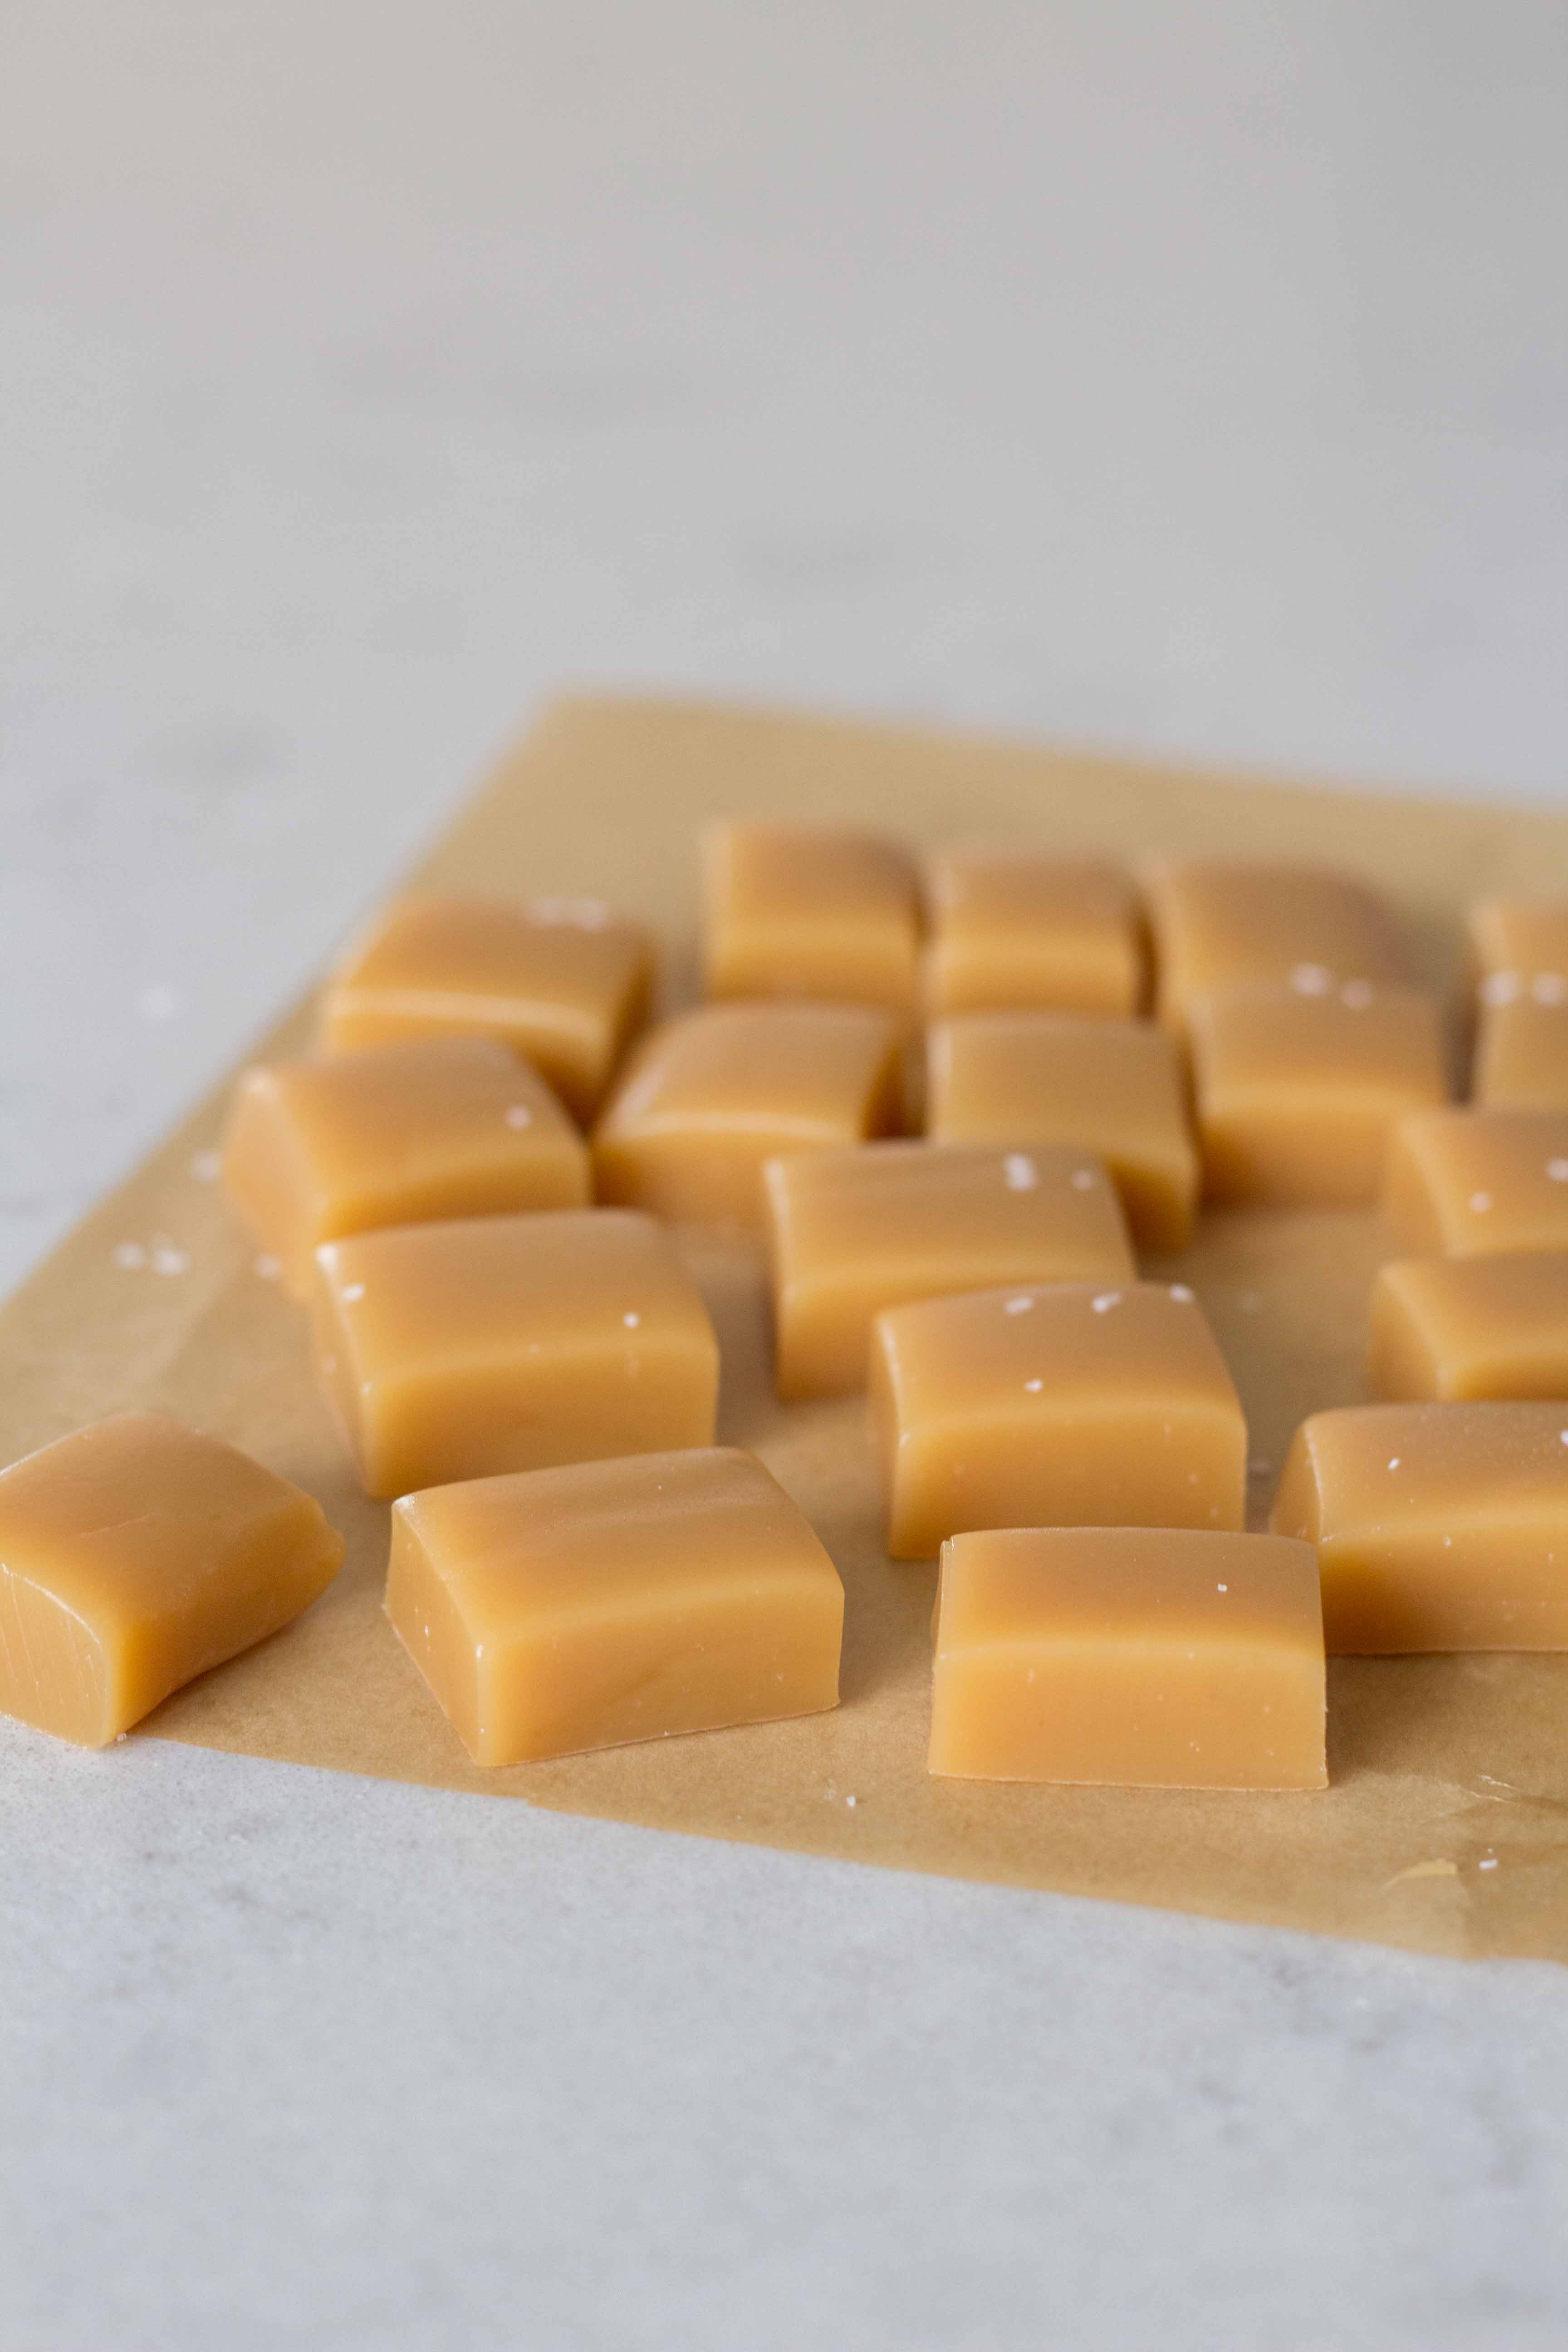 Easy 4 Ingredient Soft Caramels - No Candy Thermometer